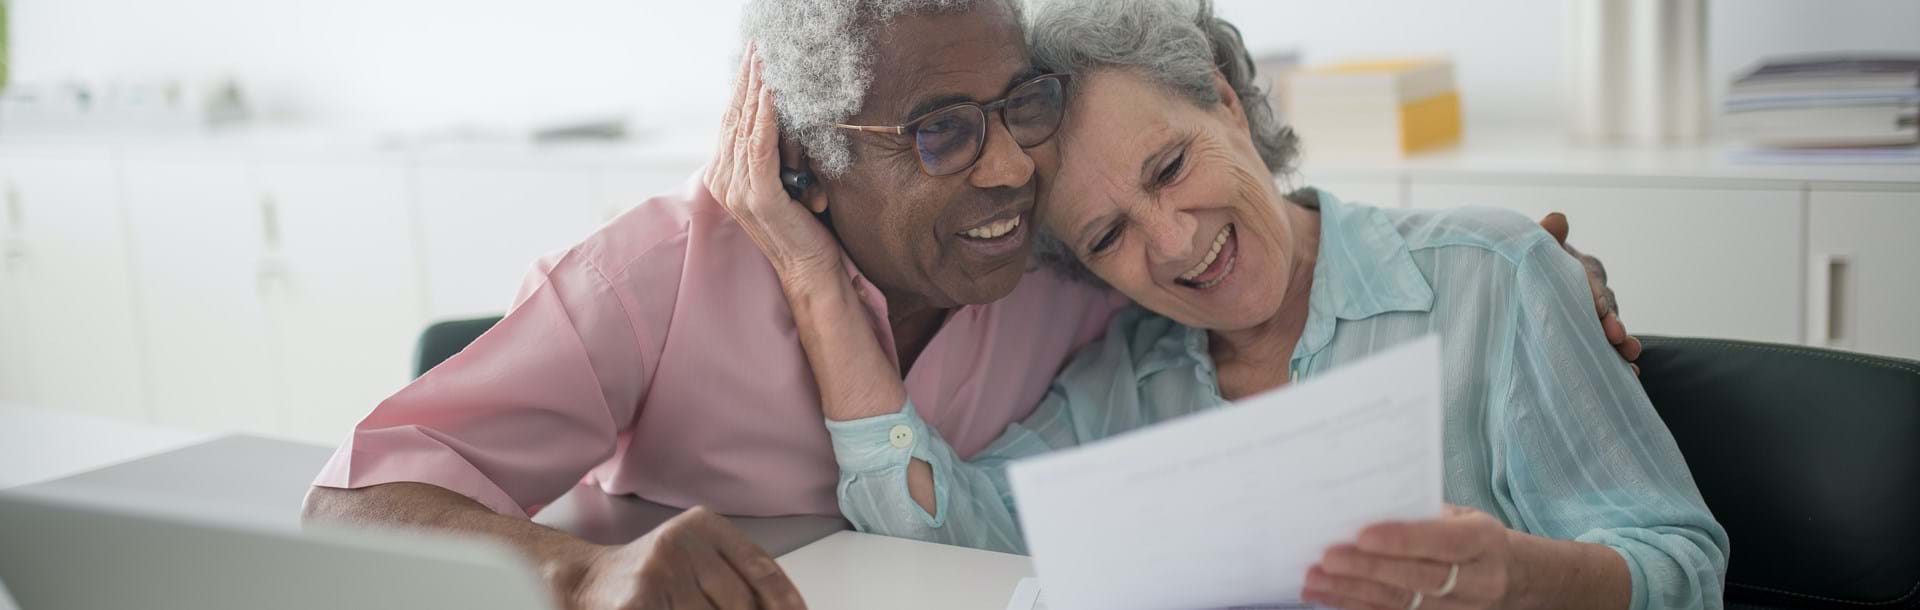 An elderly couple laughing while holding a document and using a laptop